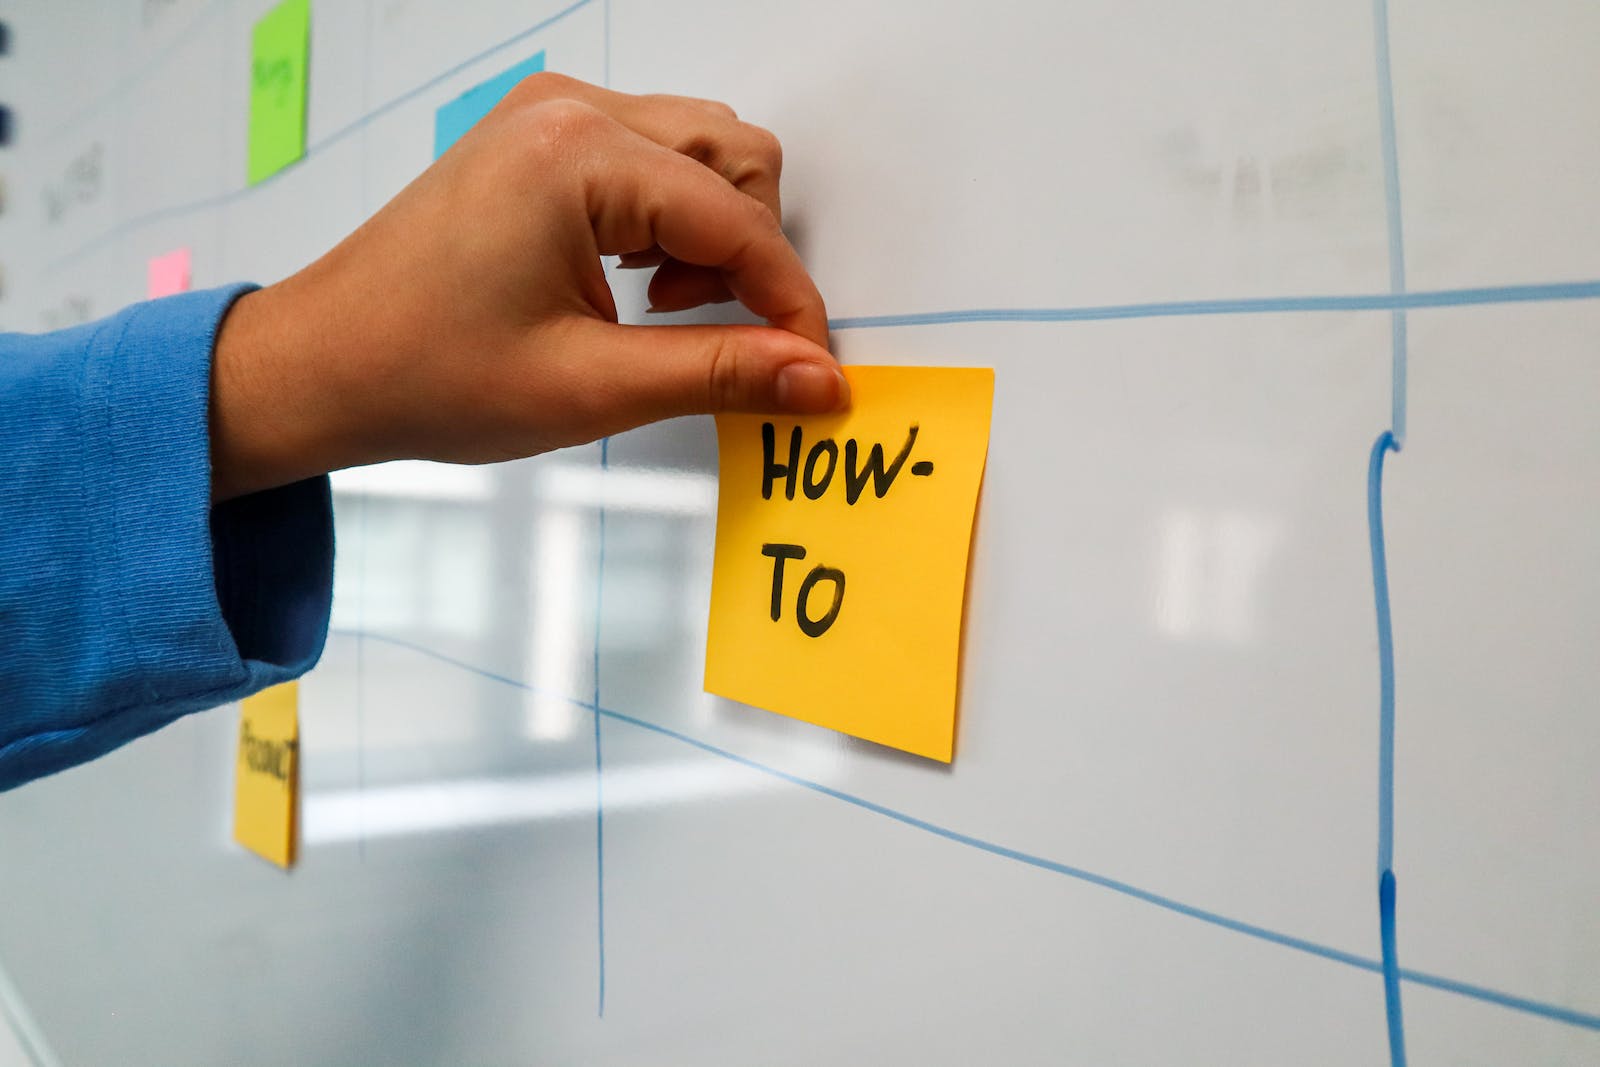 Person sticking a post-it on a white board with the words "How to" written on it